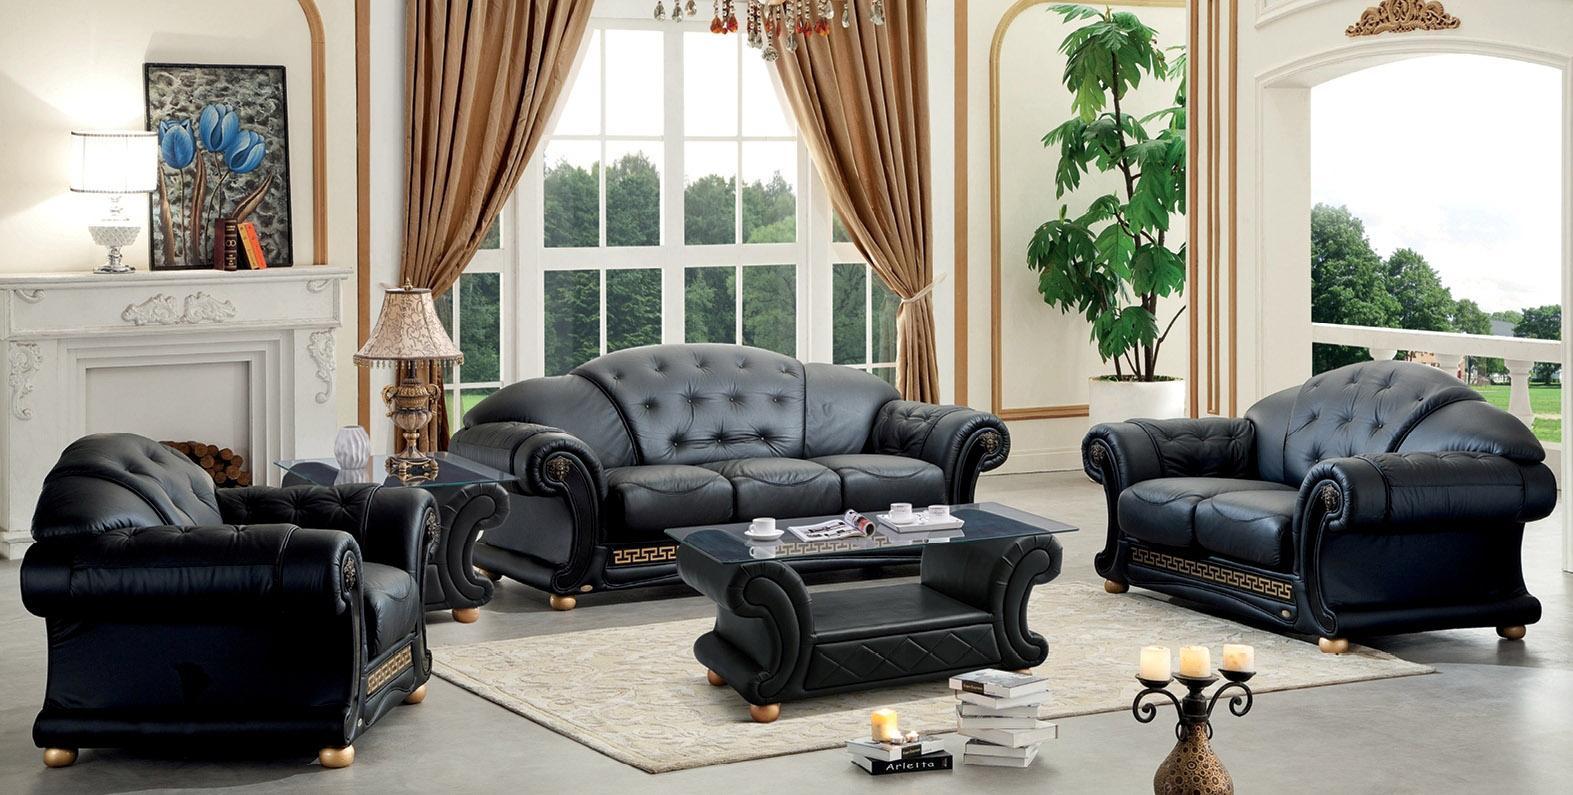 Traditional Sofa Loveseat Chair V.Cleopatra APOLO-Black-3-set in Black Leather